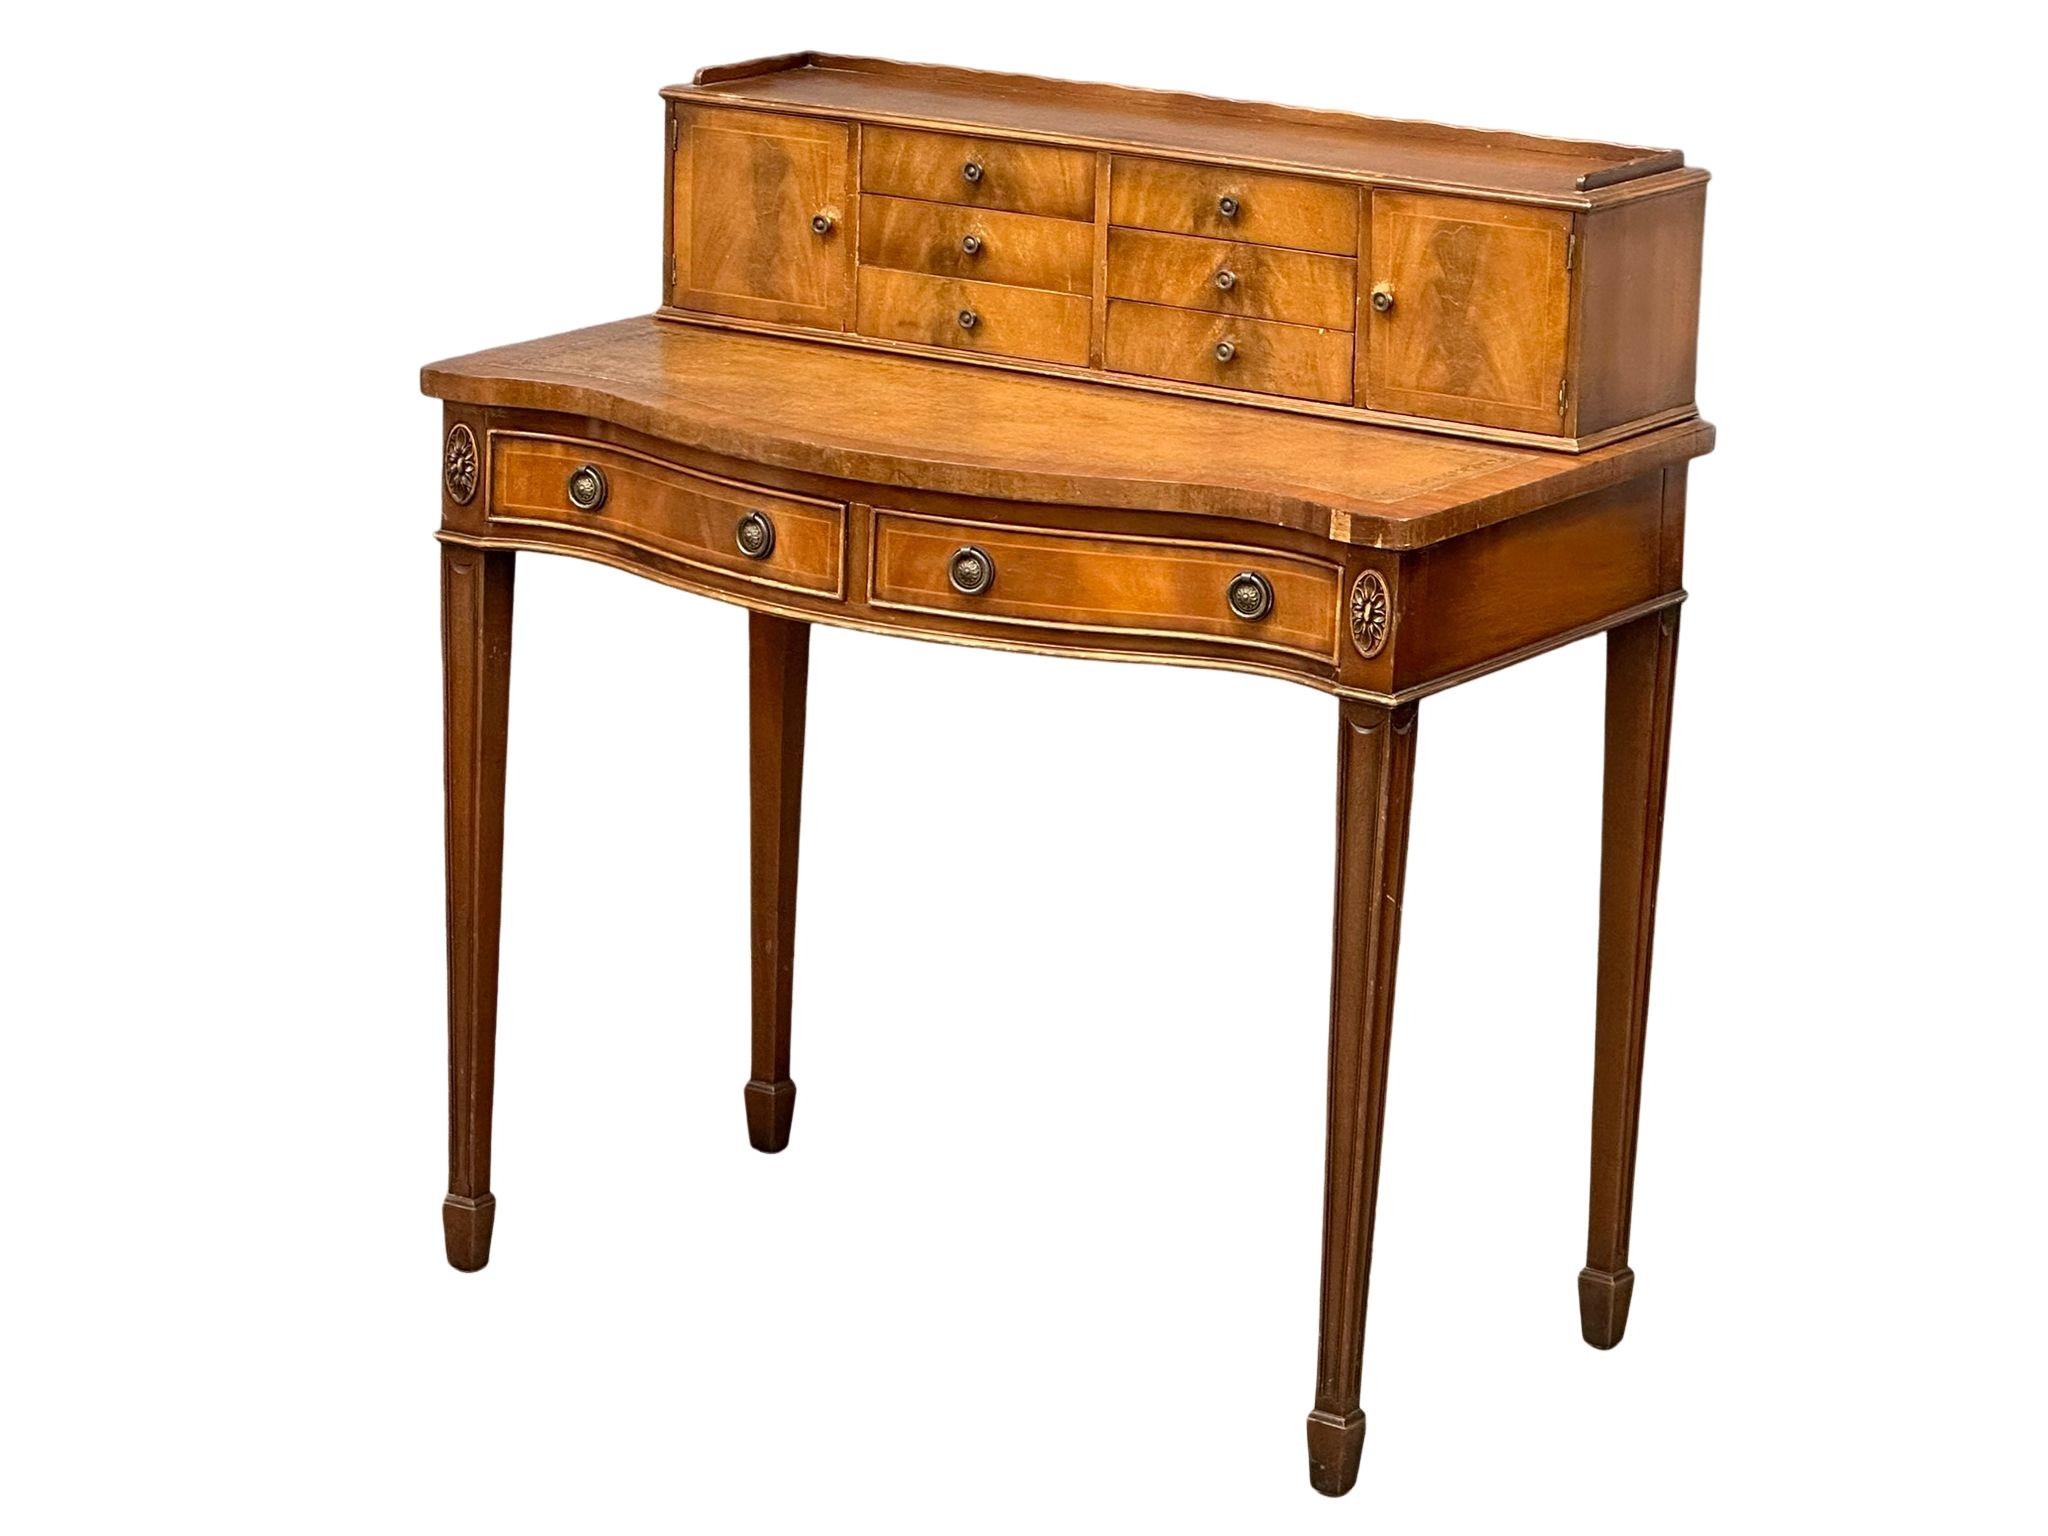 A Hepplewhite style mahogany writing desk with leather top. 91x51x98cm - Image 4 of 6